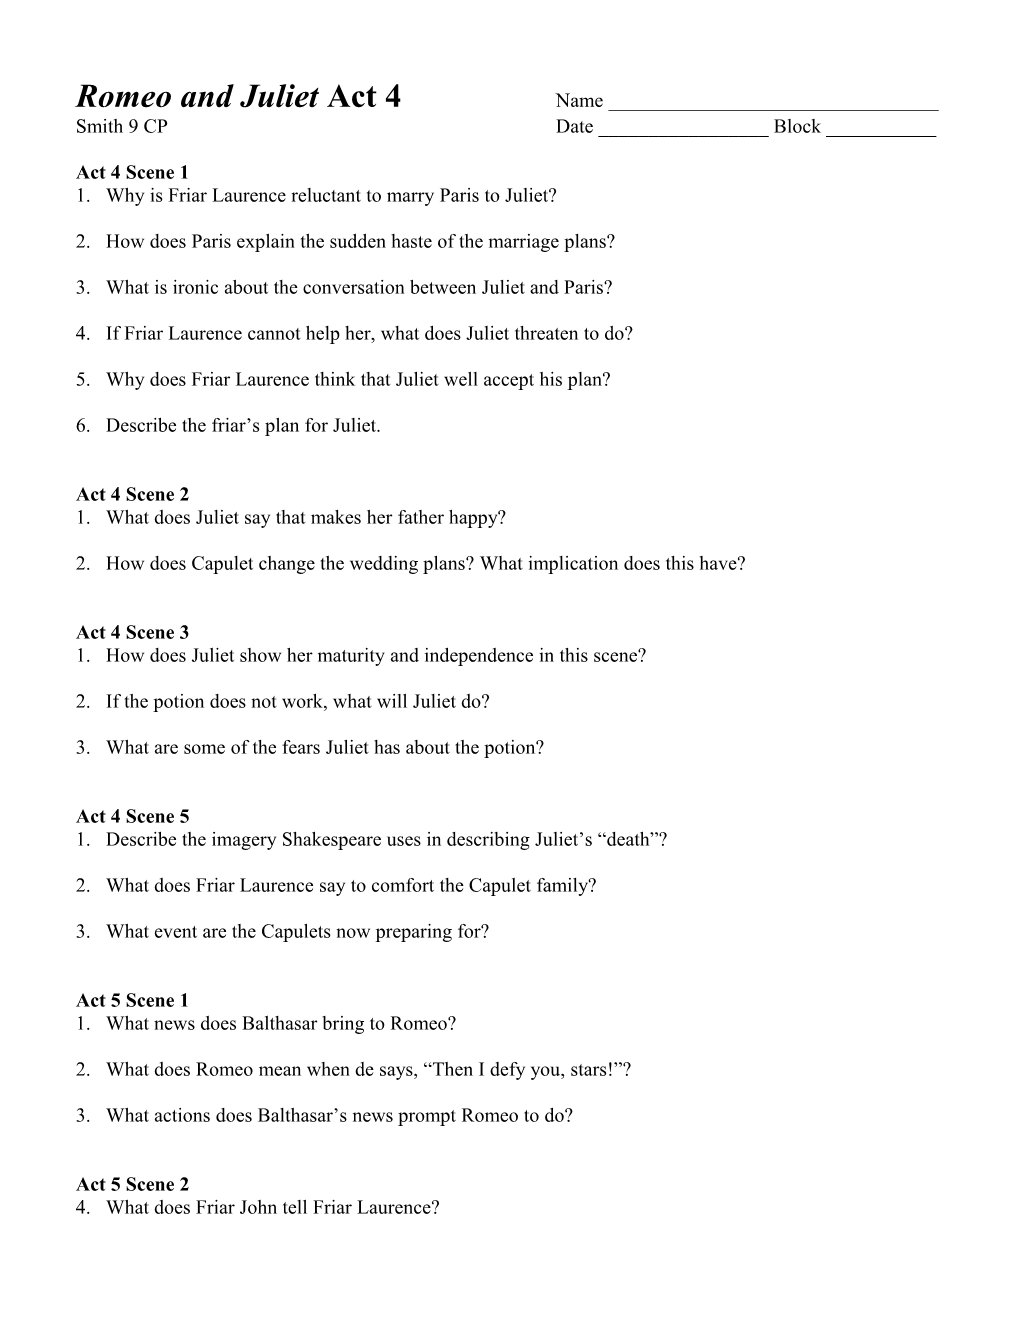 Romeo and Juliet Act 4 Questions